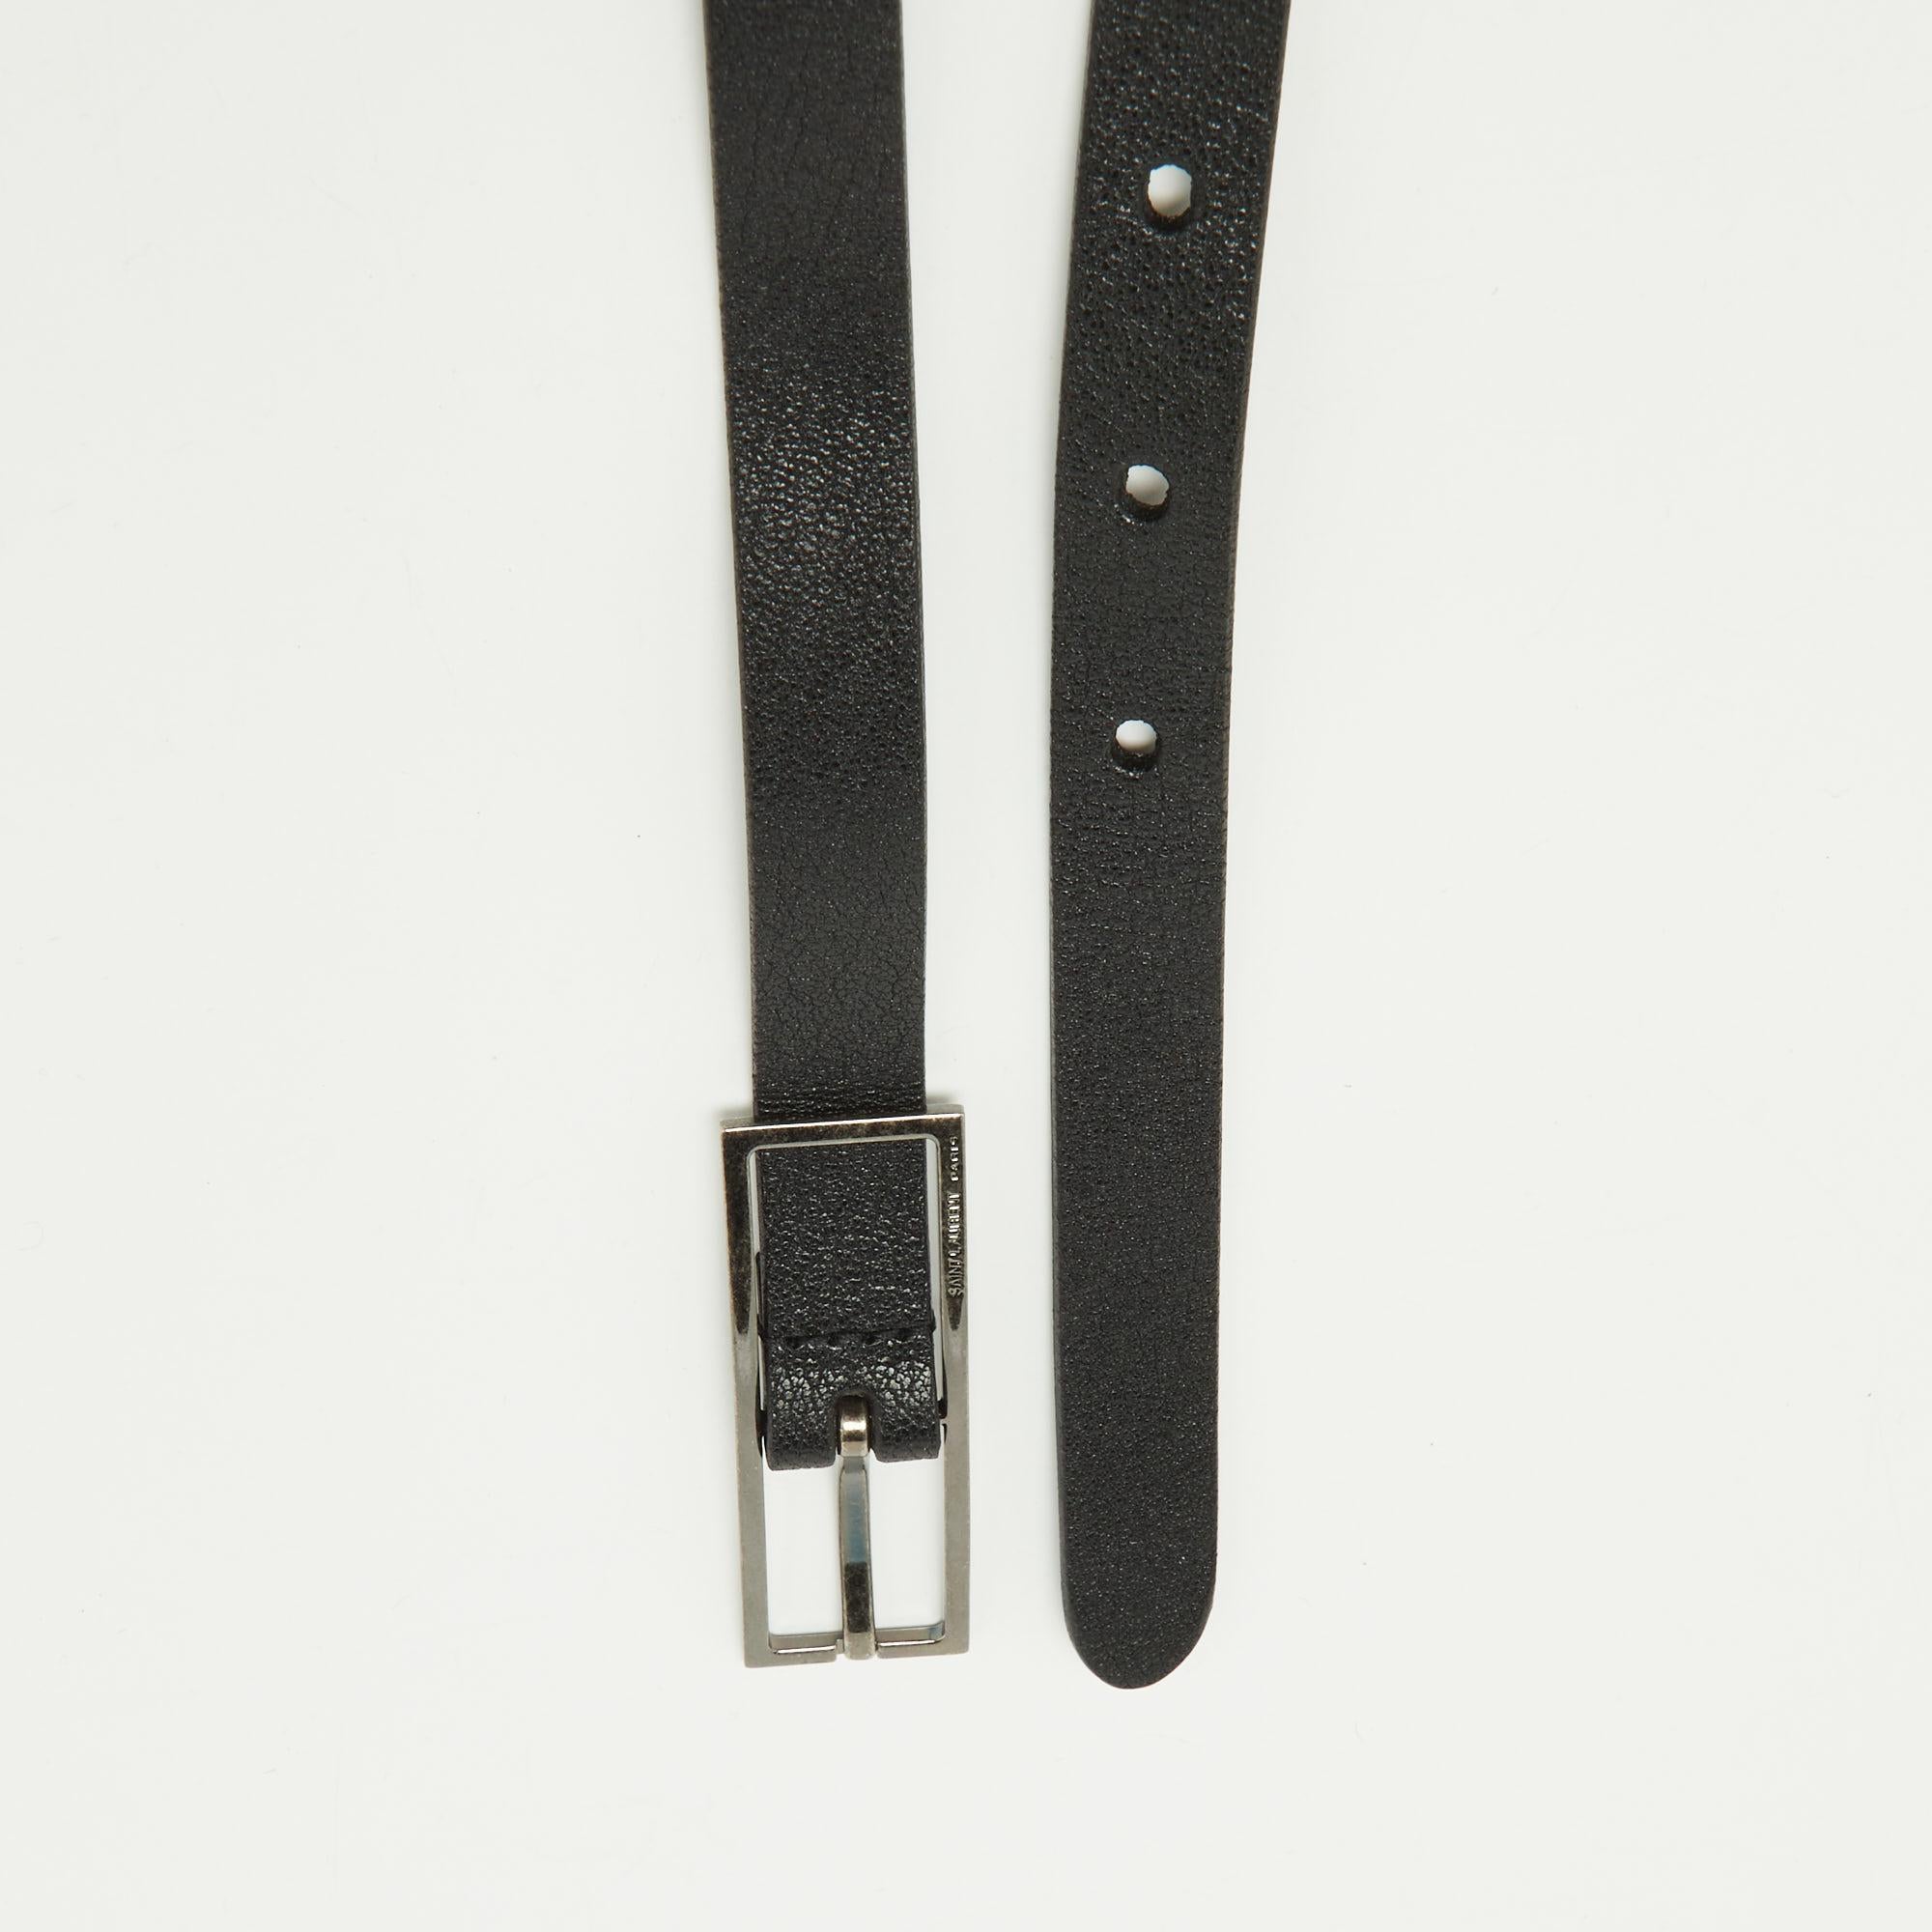 This slim belt from Saint Laurent redefines simplistic fashion. The belt's appeal lies in its minimalistic style with only the texture of the black leather and the gunmetal-tone buckle adding to its show. It is 95 cm long with the brand's name